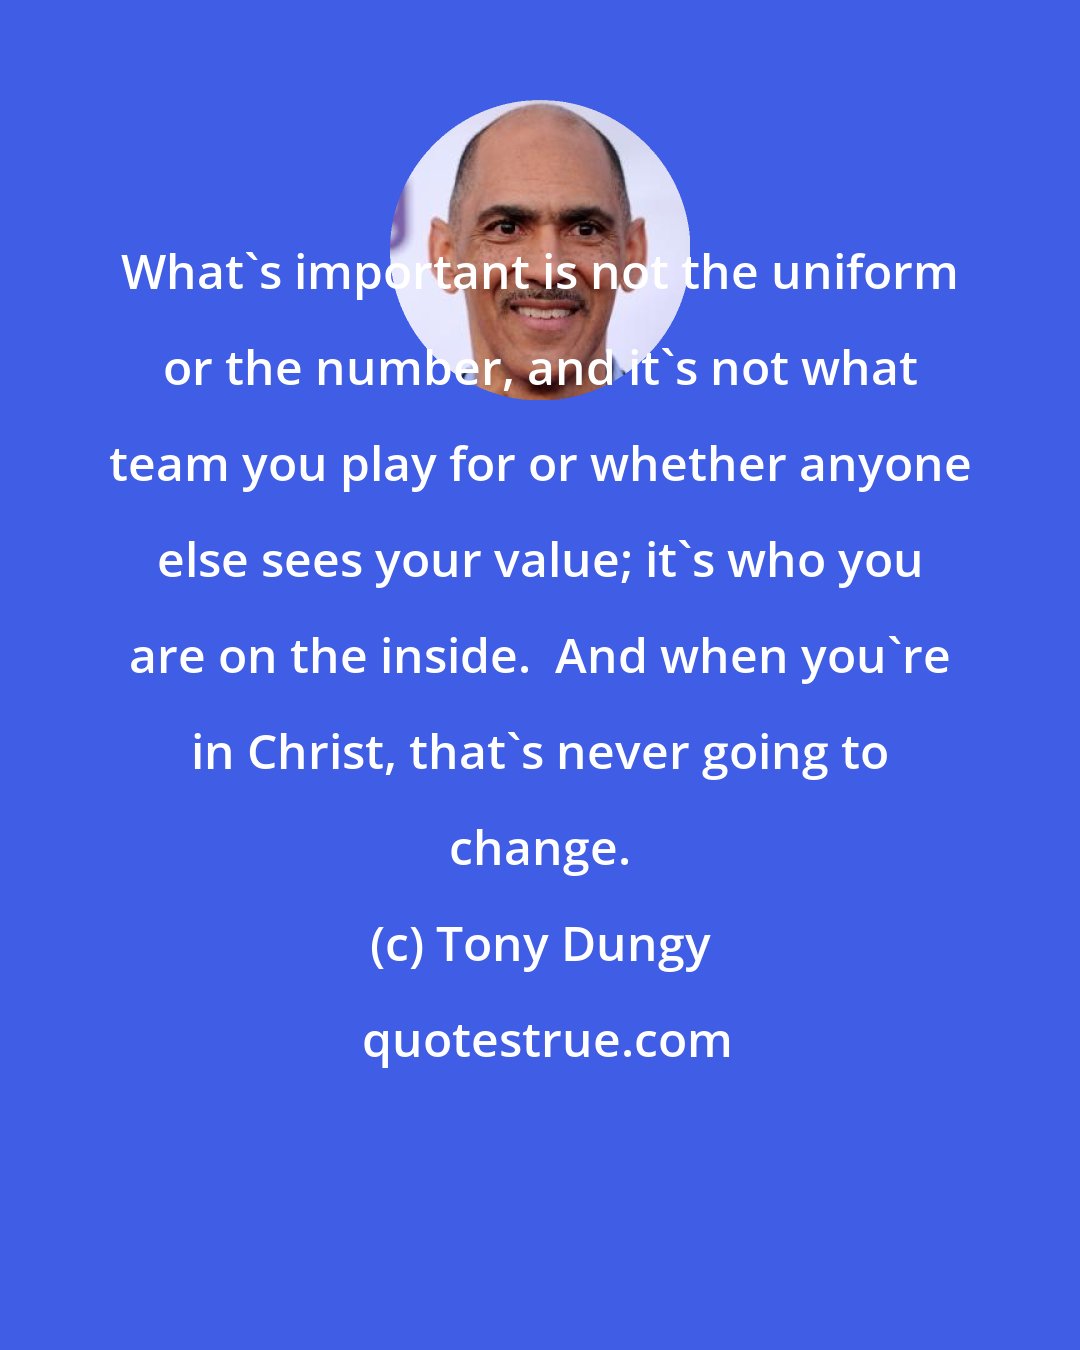 Tony Dungy: What's important is not the uniform or the number, and it's not what team you play for or whether anyone else sees your value; it's who you are on the inside.  And when you're in Christ, that's never going to change.